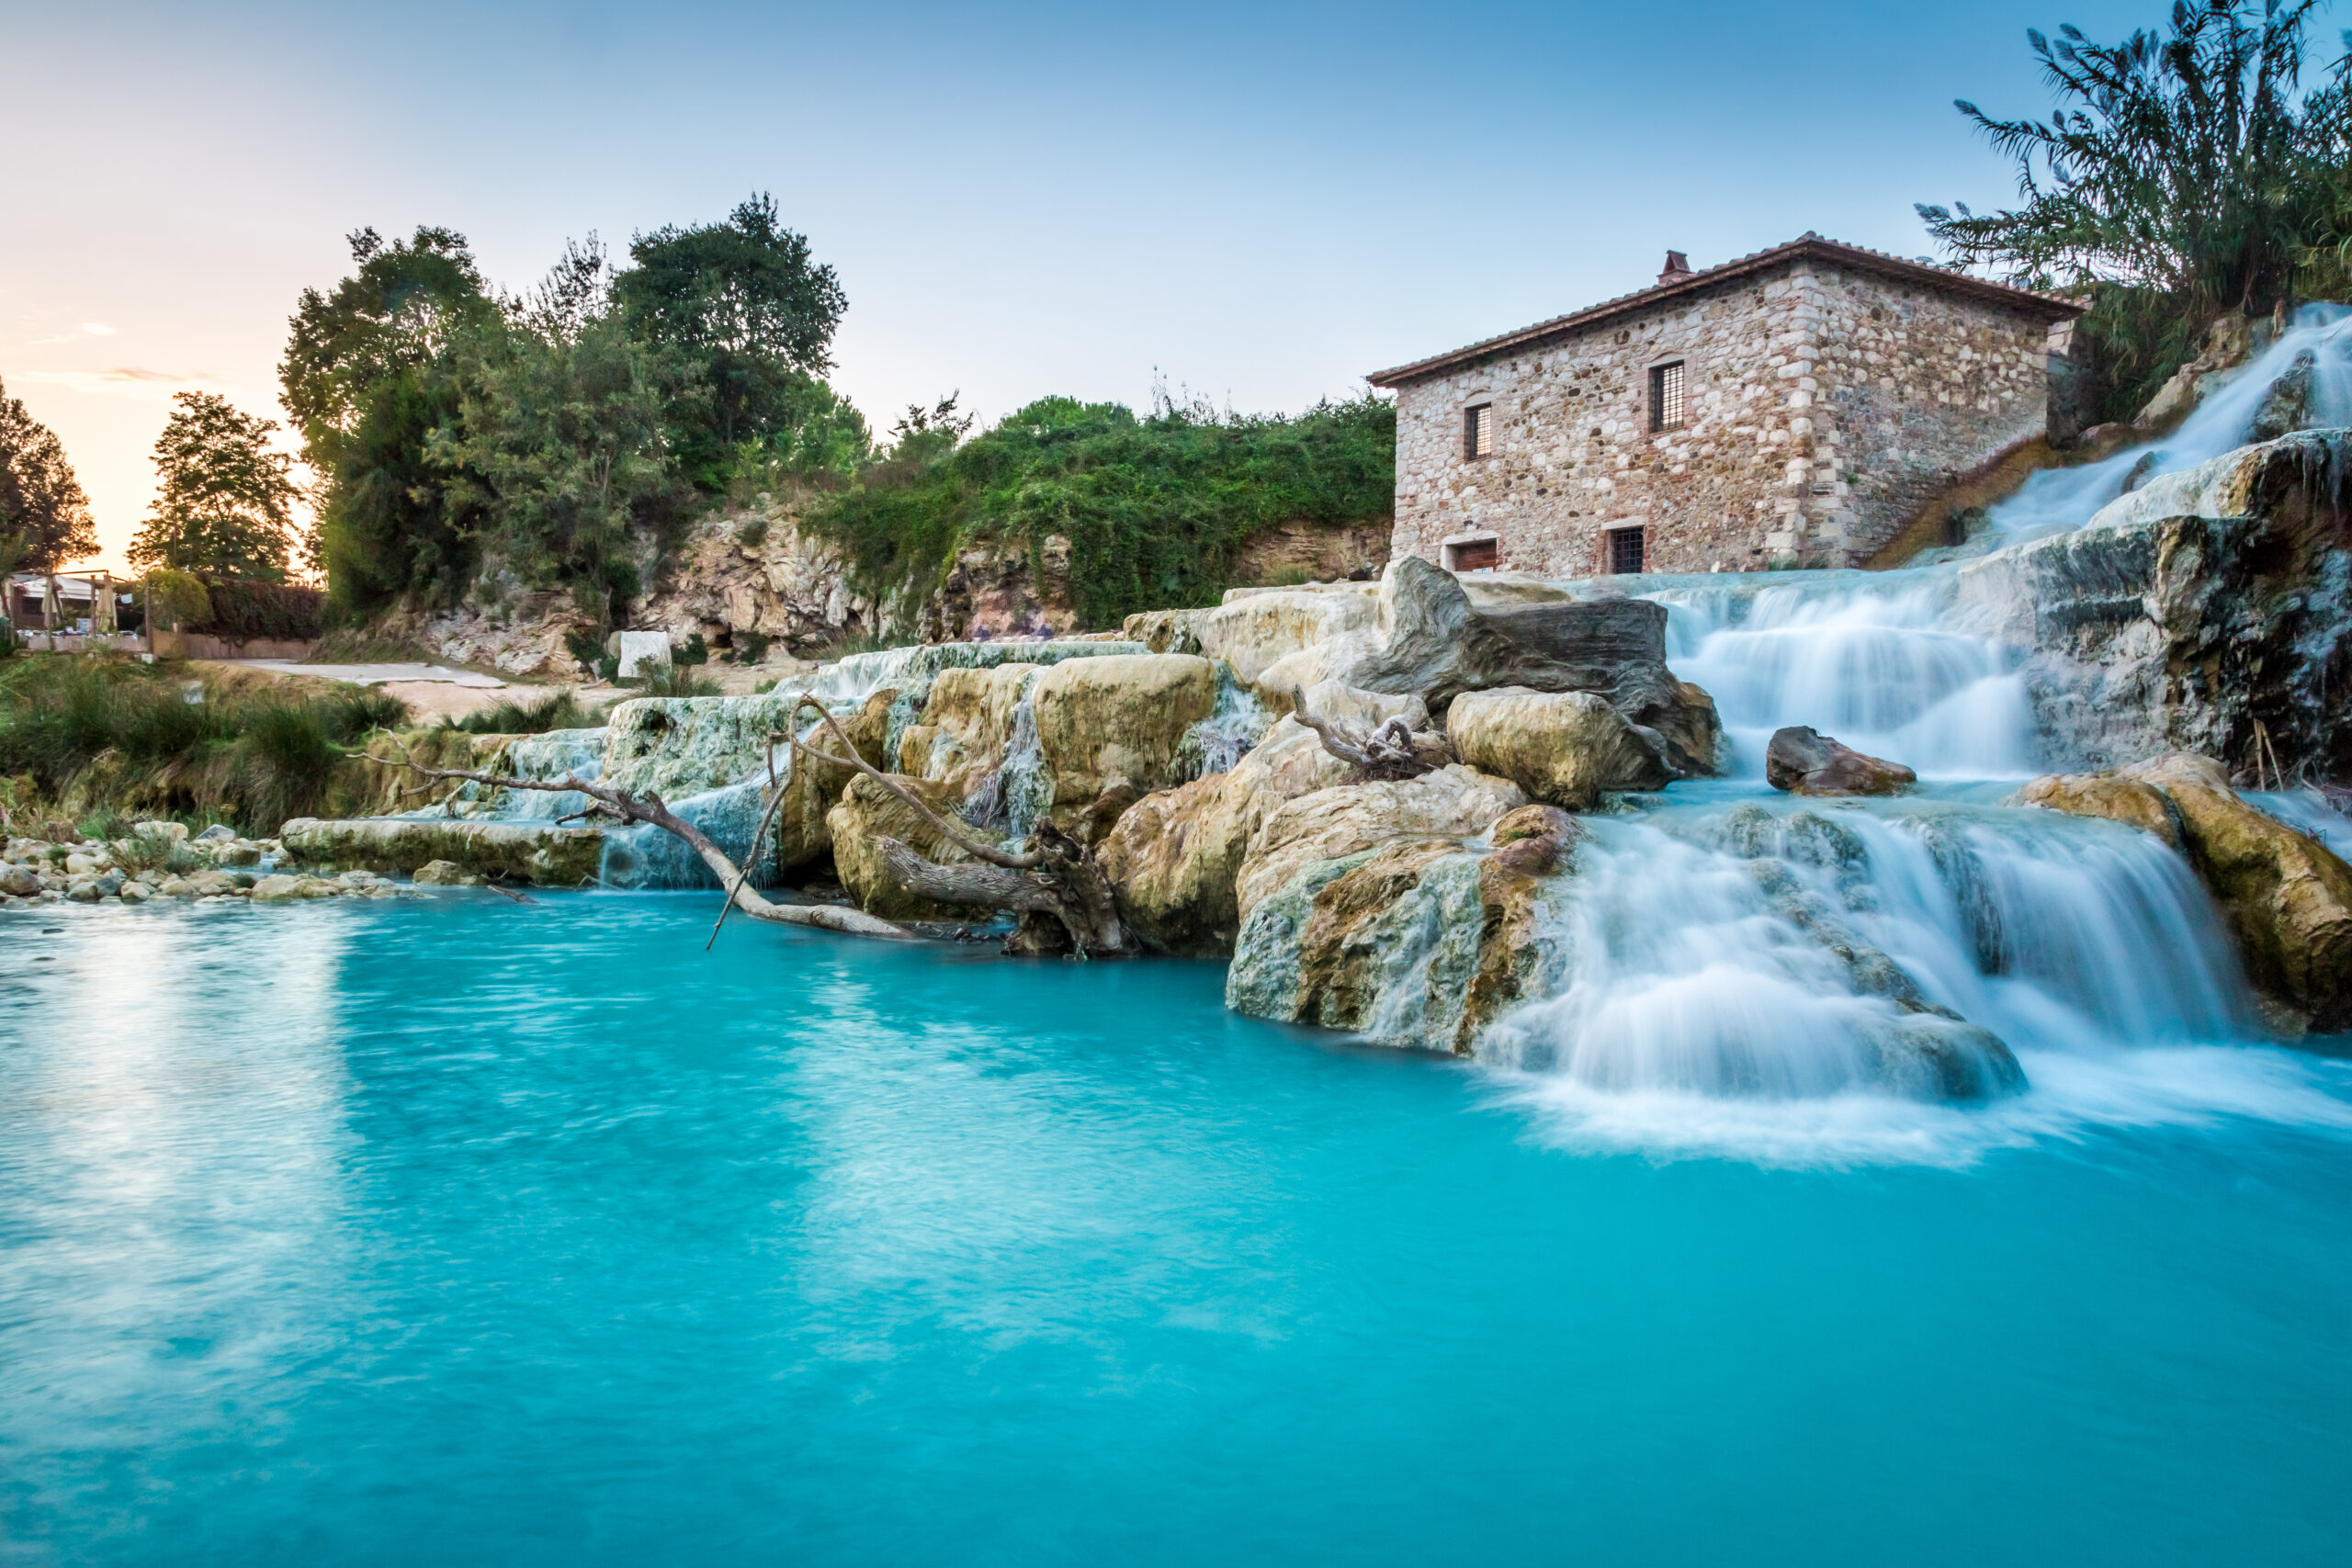 Wellness and relaxation in nearby spas and free hot springs of Tuscany